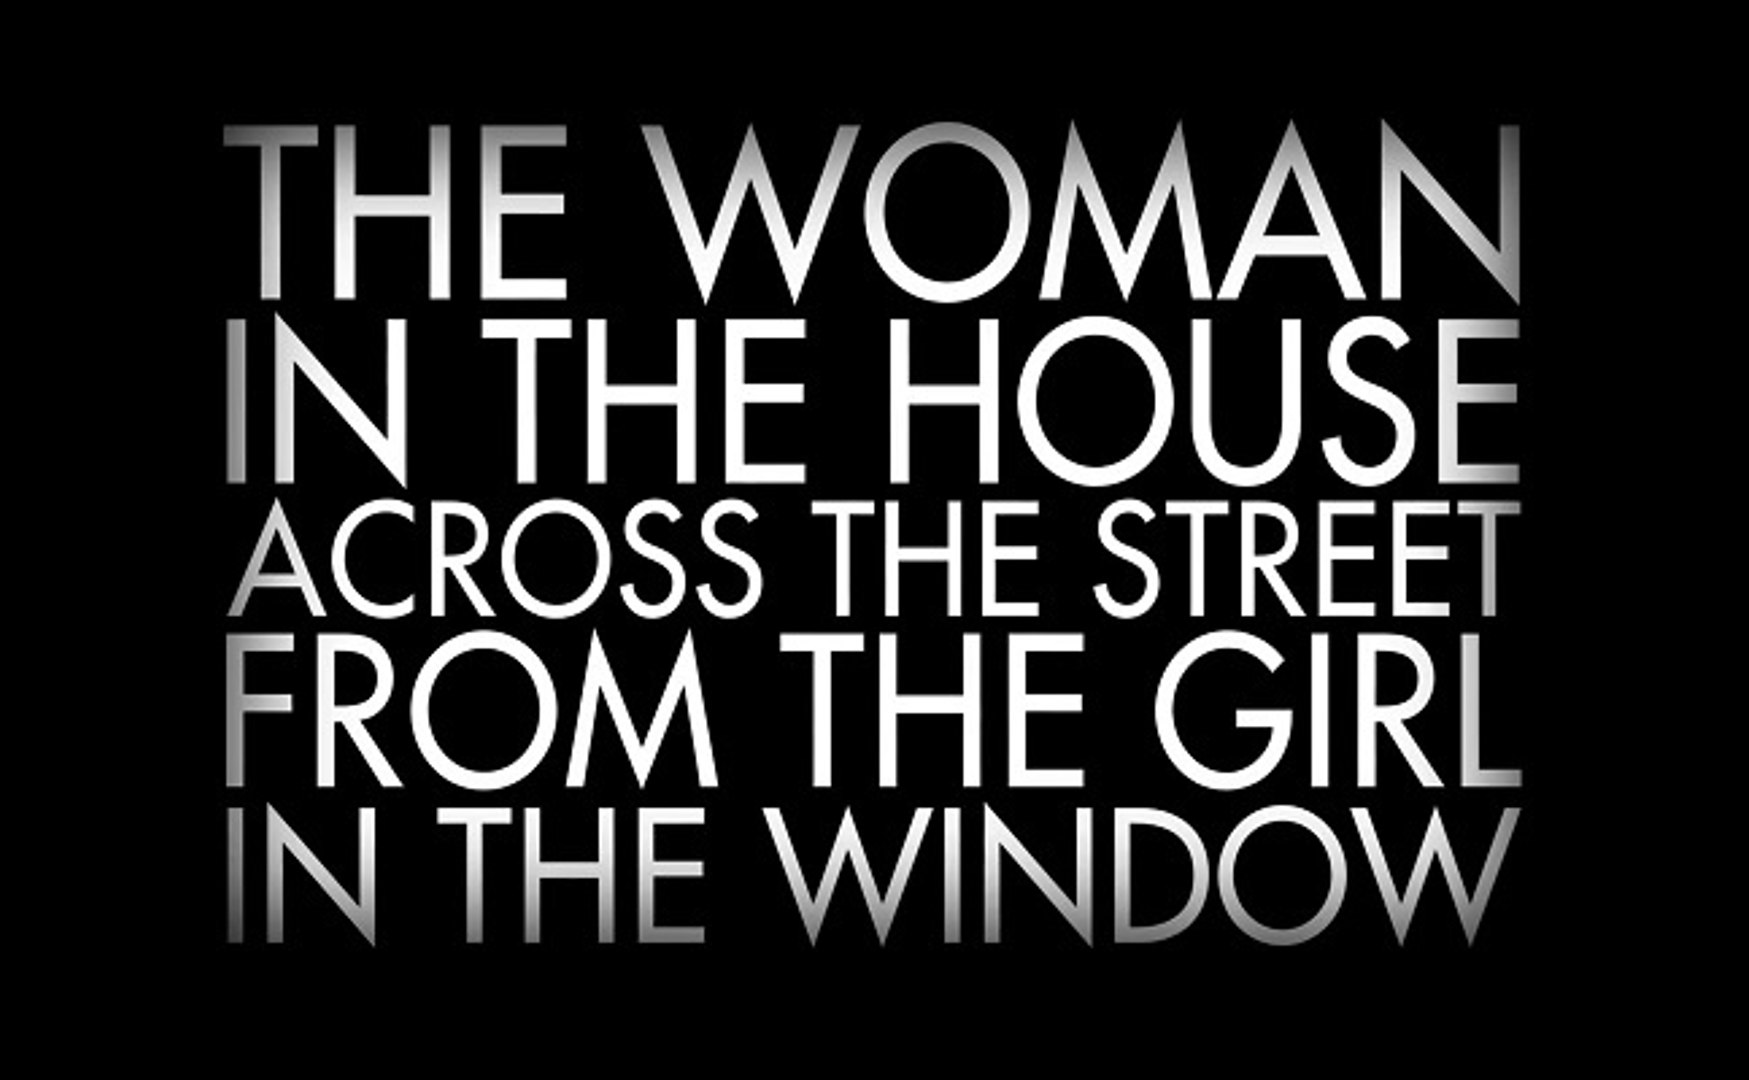 The woman in the house across the street from the girl in the window